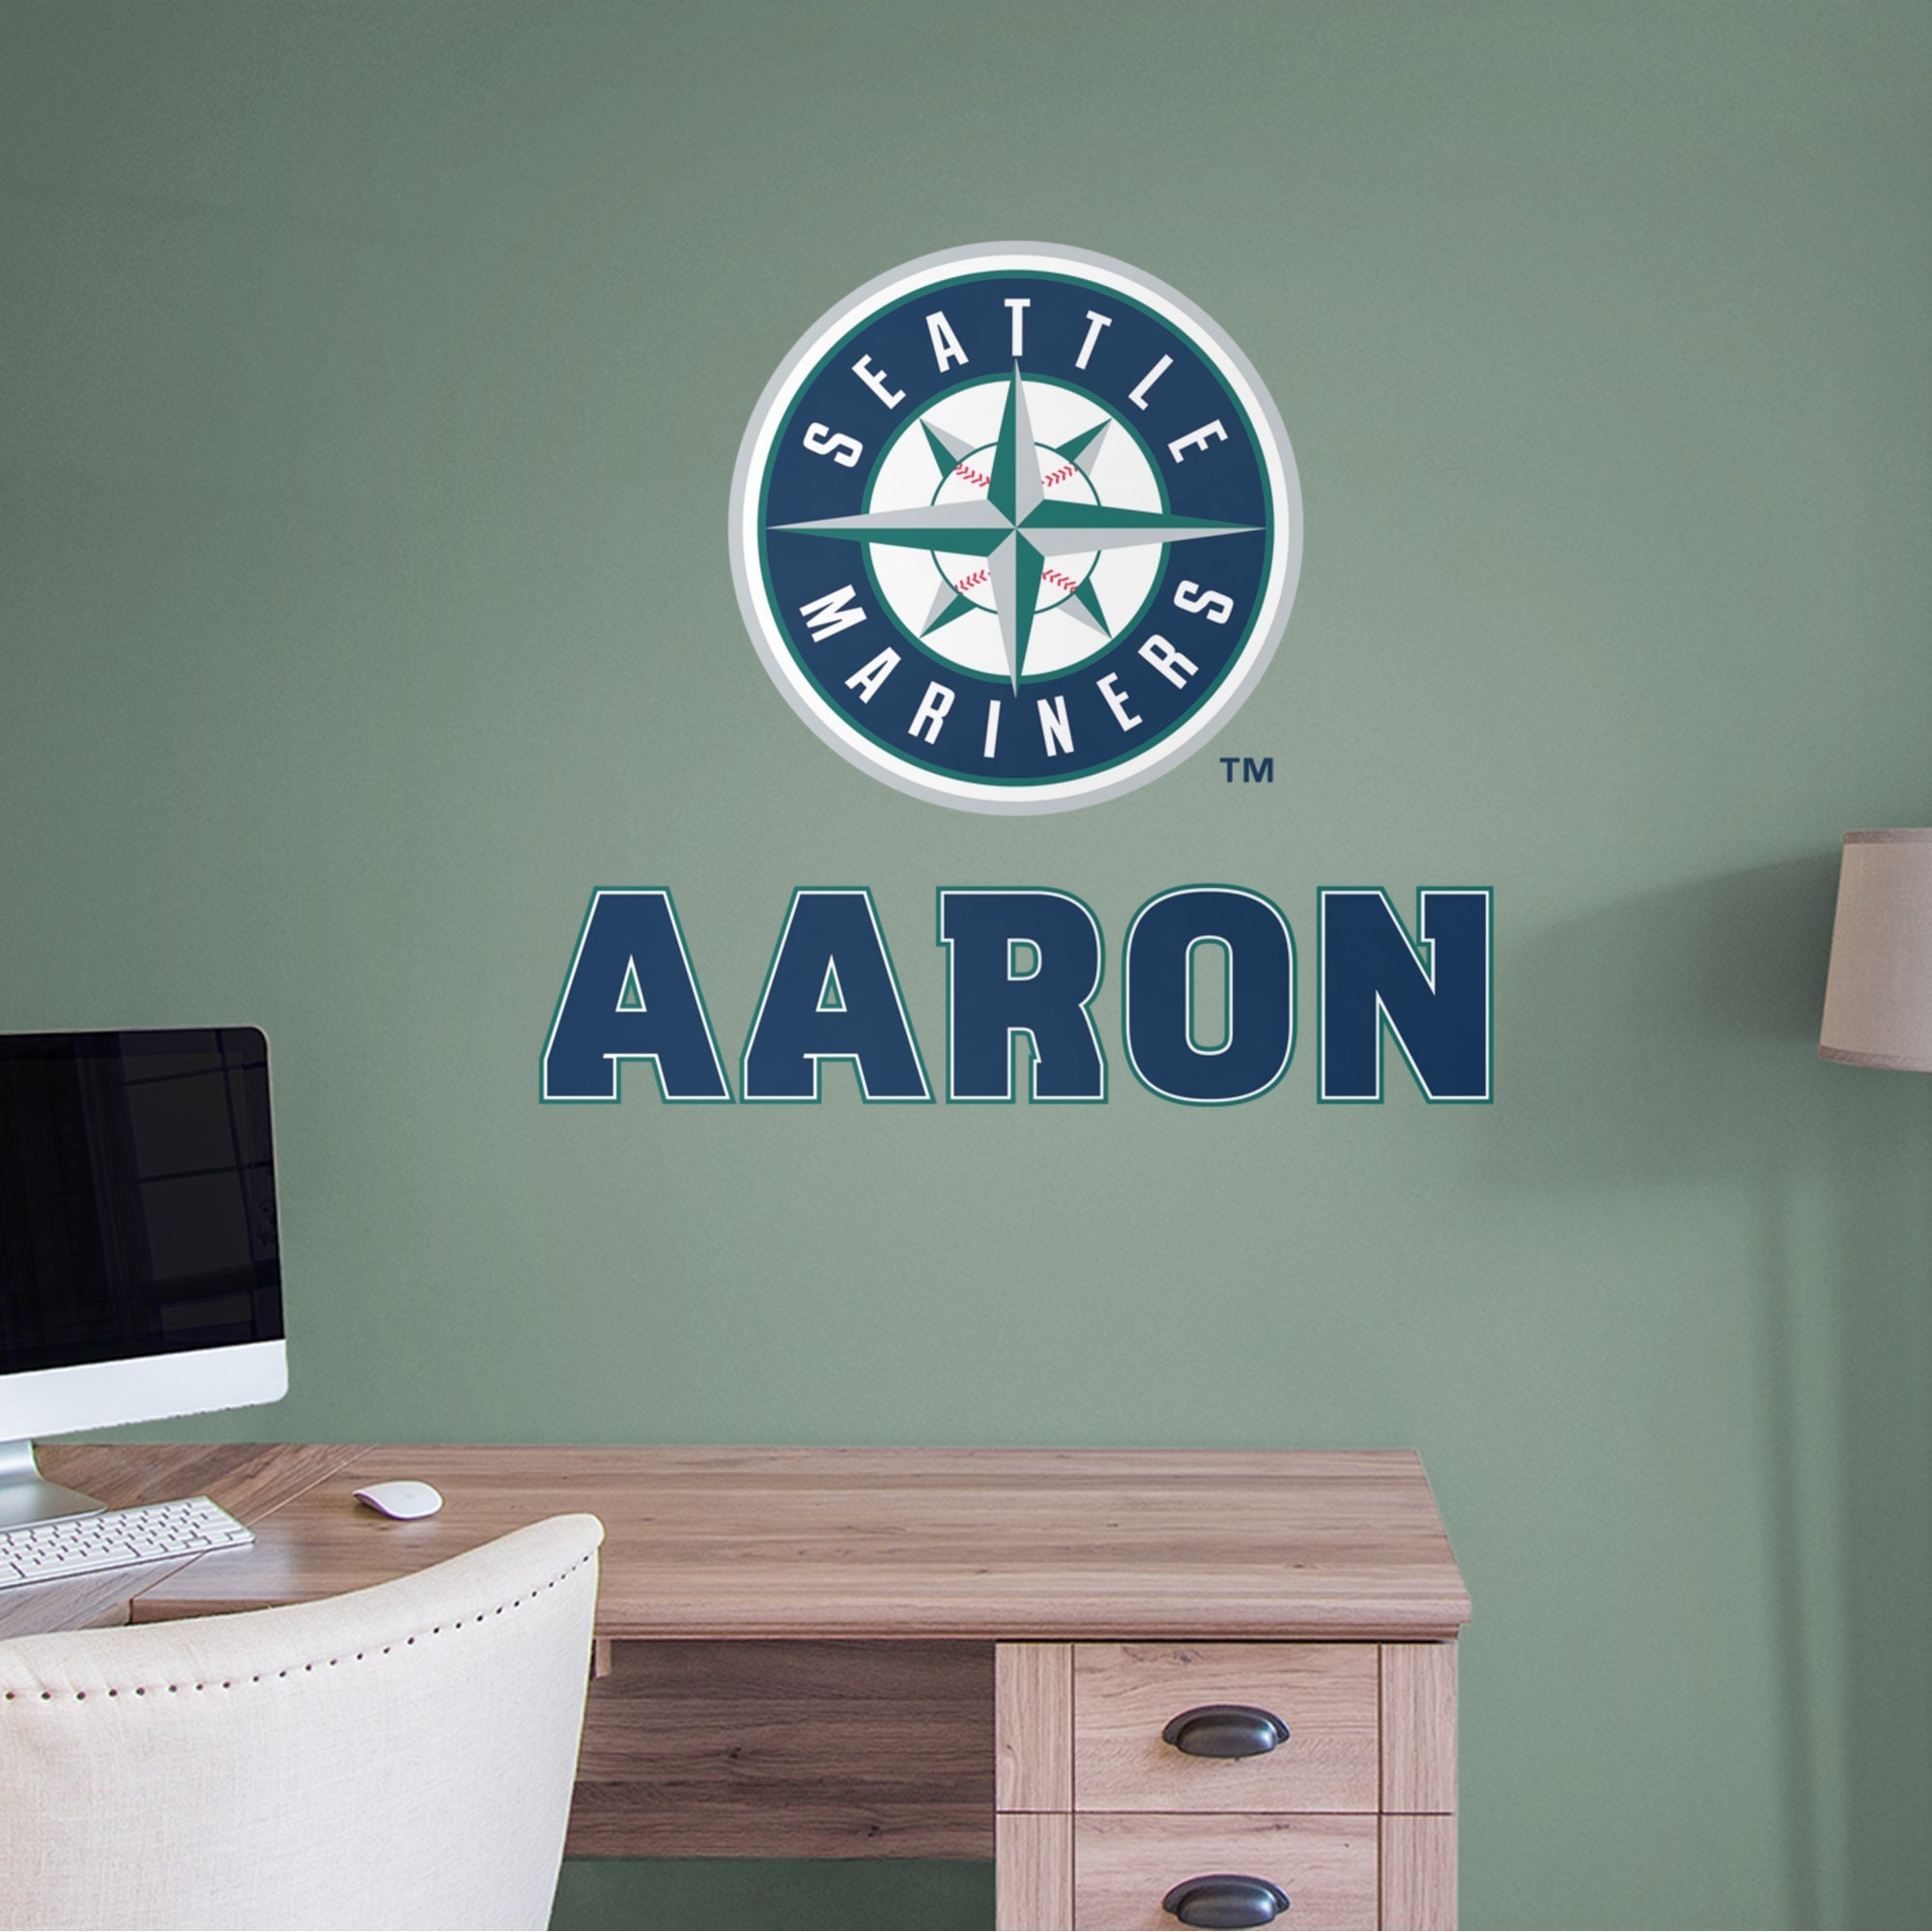 Seattle Mariners: Stacked Personalized Name - Officially Licensed MLB Transfer Decal in Navy (52"W x 39.5"H) by Fathead | Vinyl